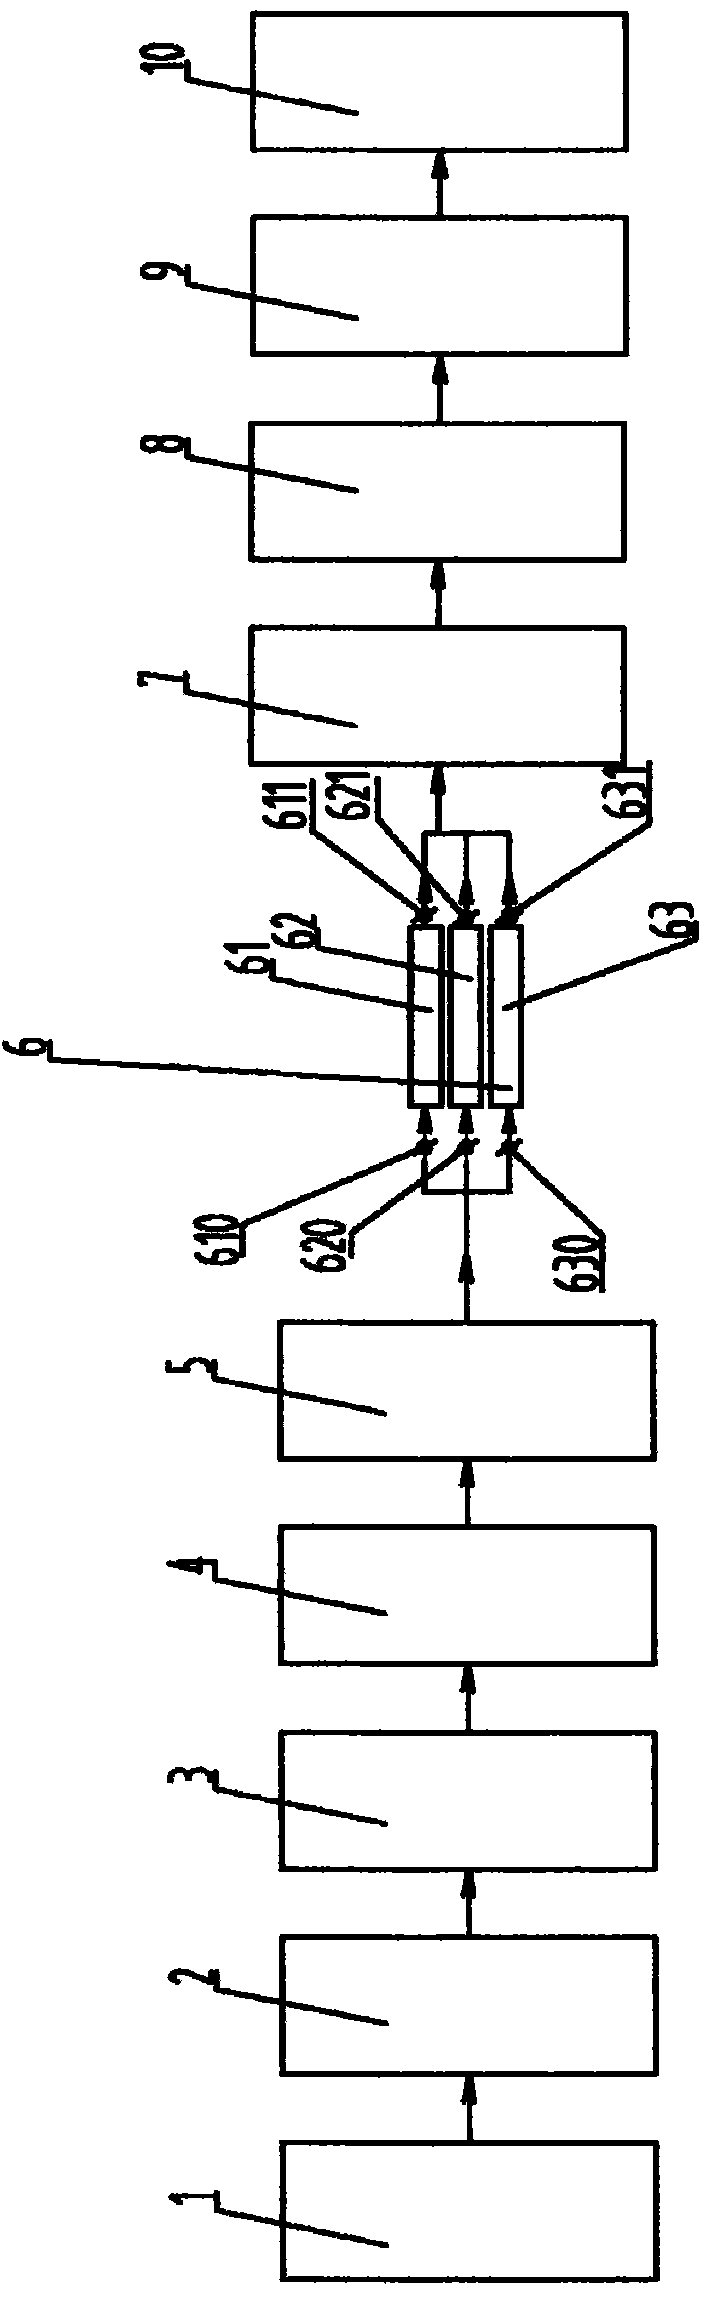 Supercritical carbon dioxide fluid dyeing device with three dye vats